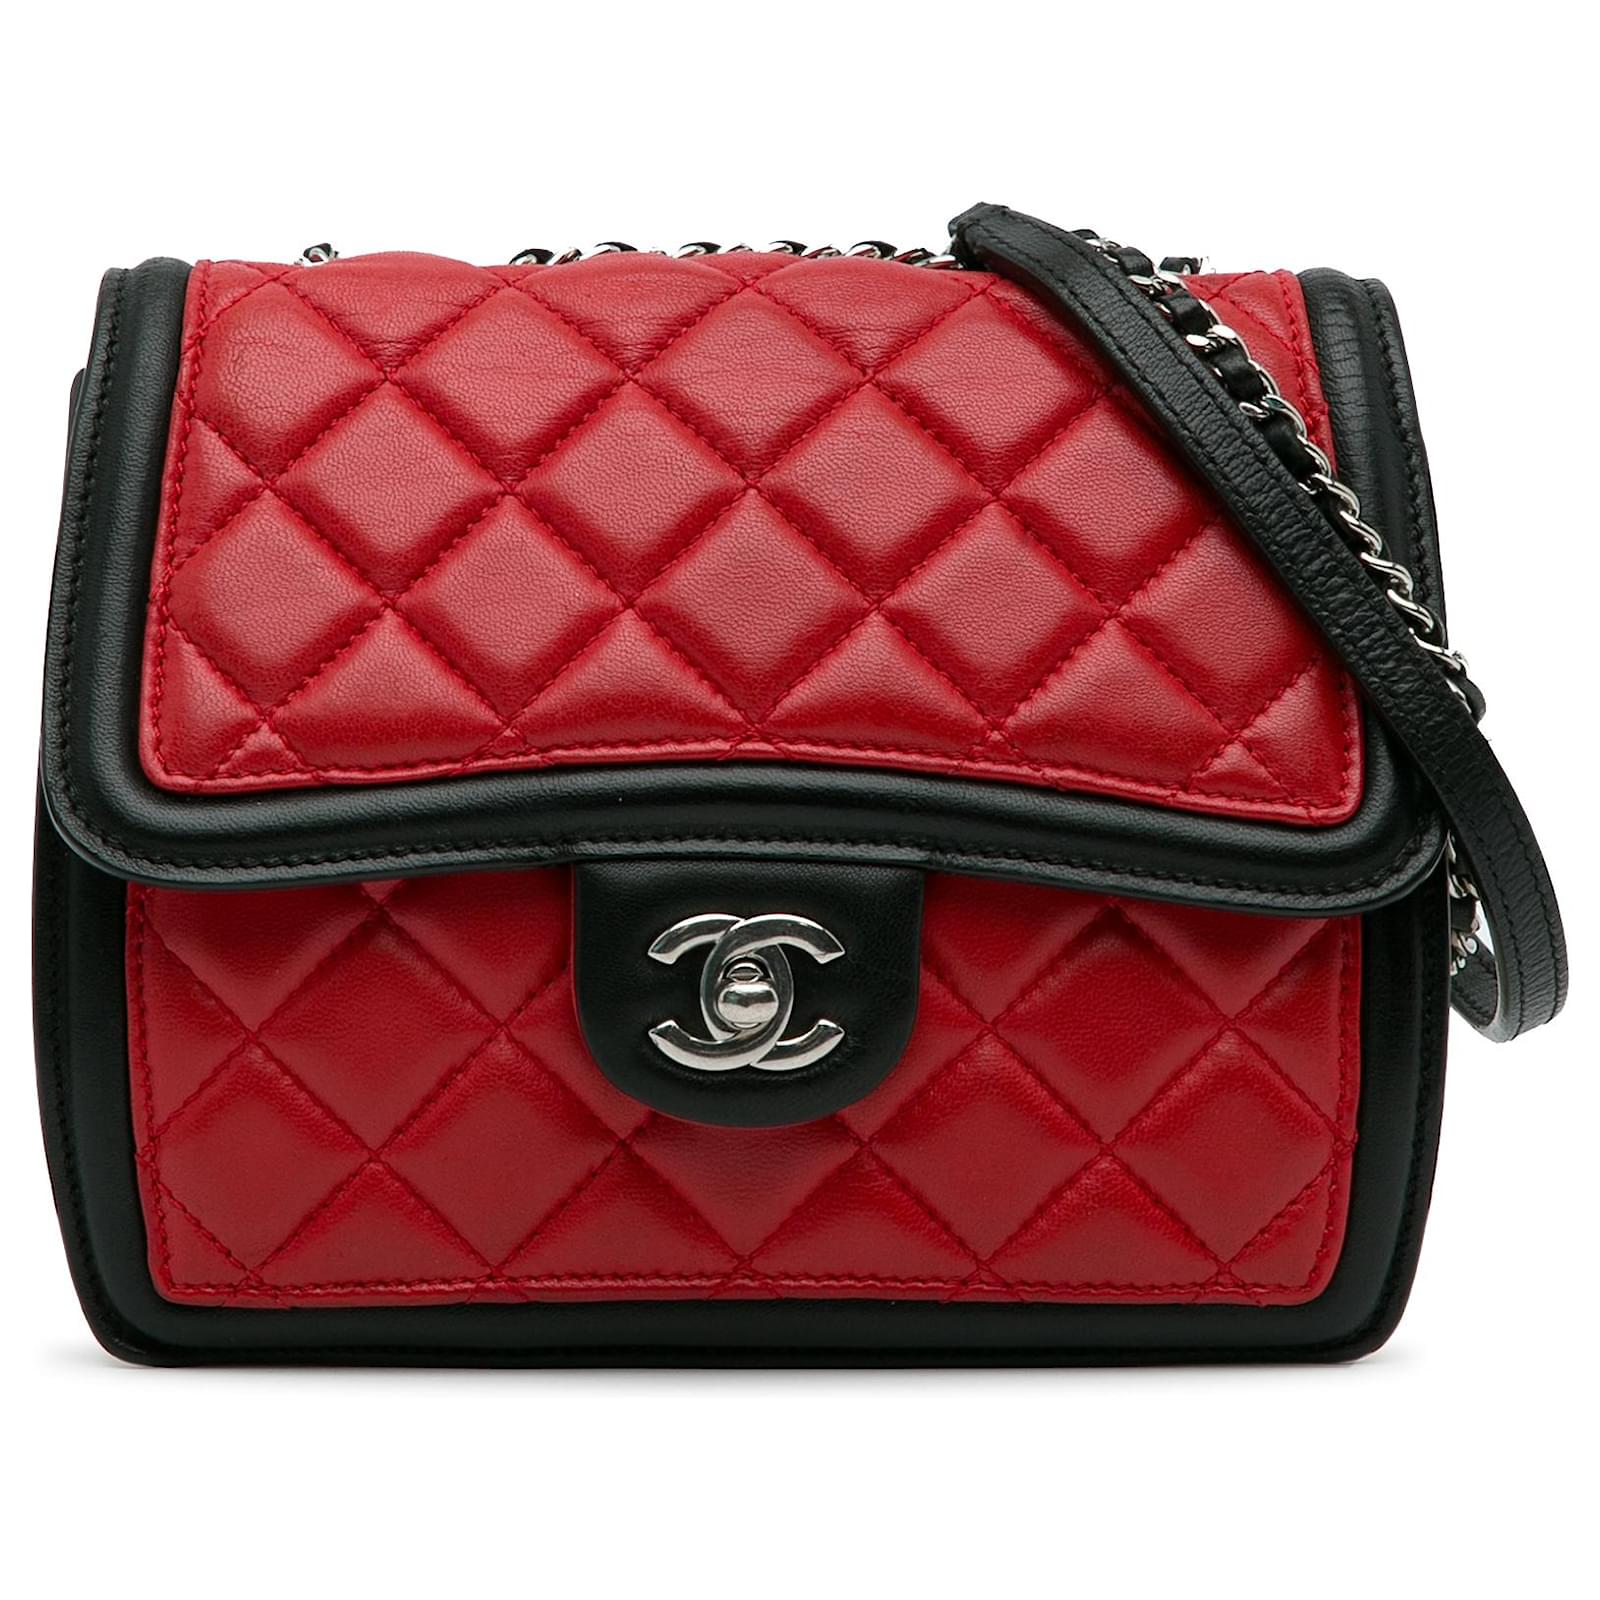 Chanel Quilted Graphic Mini Flap Bag